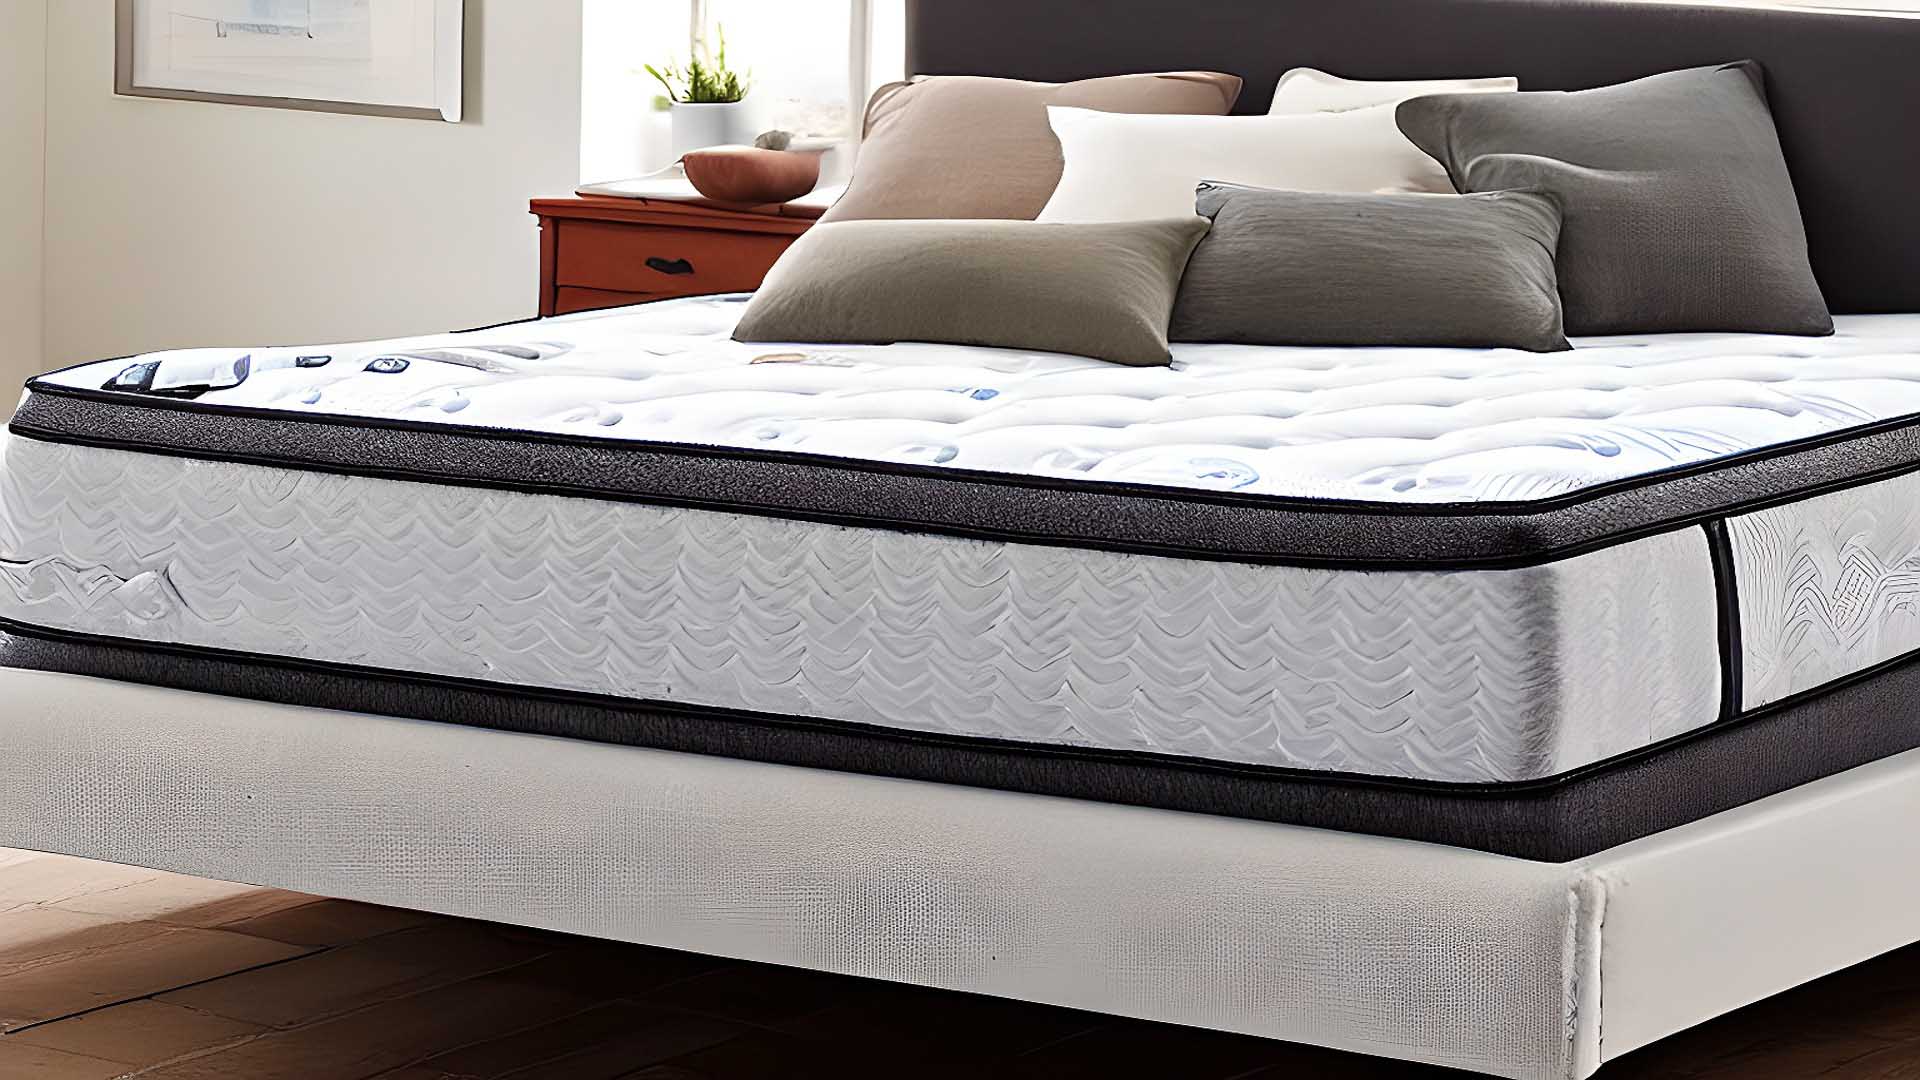 Mattress Sales & Deals in Pittsburgh, PA